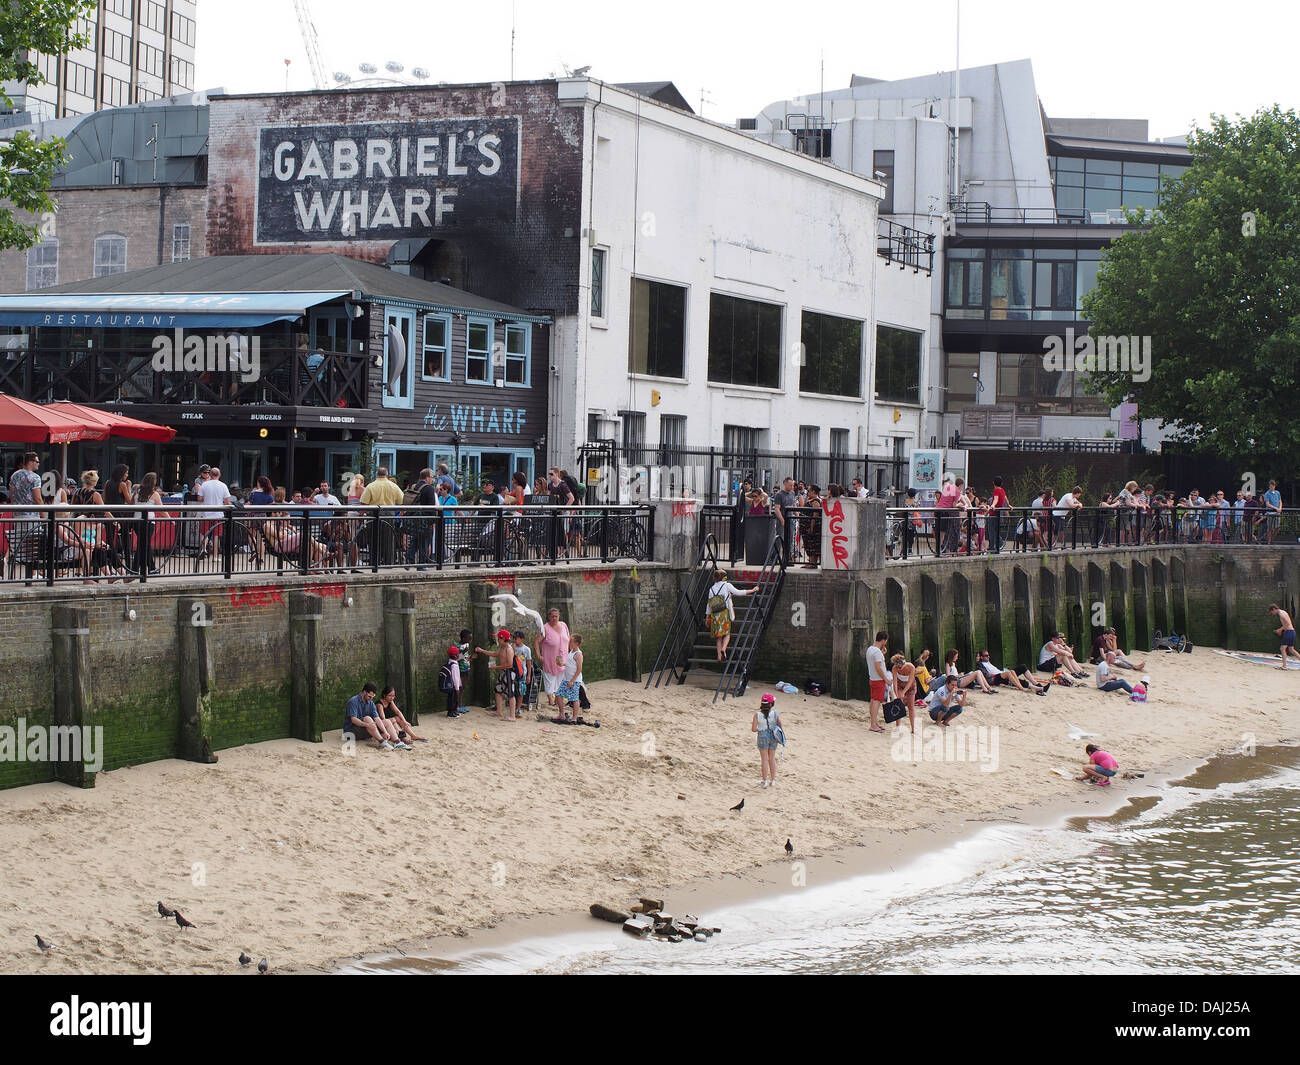 A view of the short stretch of sandy beach by Gabriel's Wharf on the River Thames in London Stock Photo